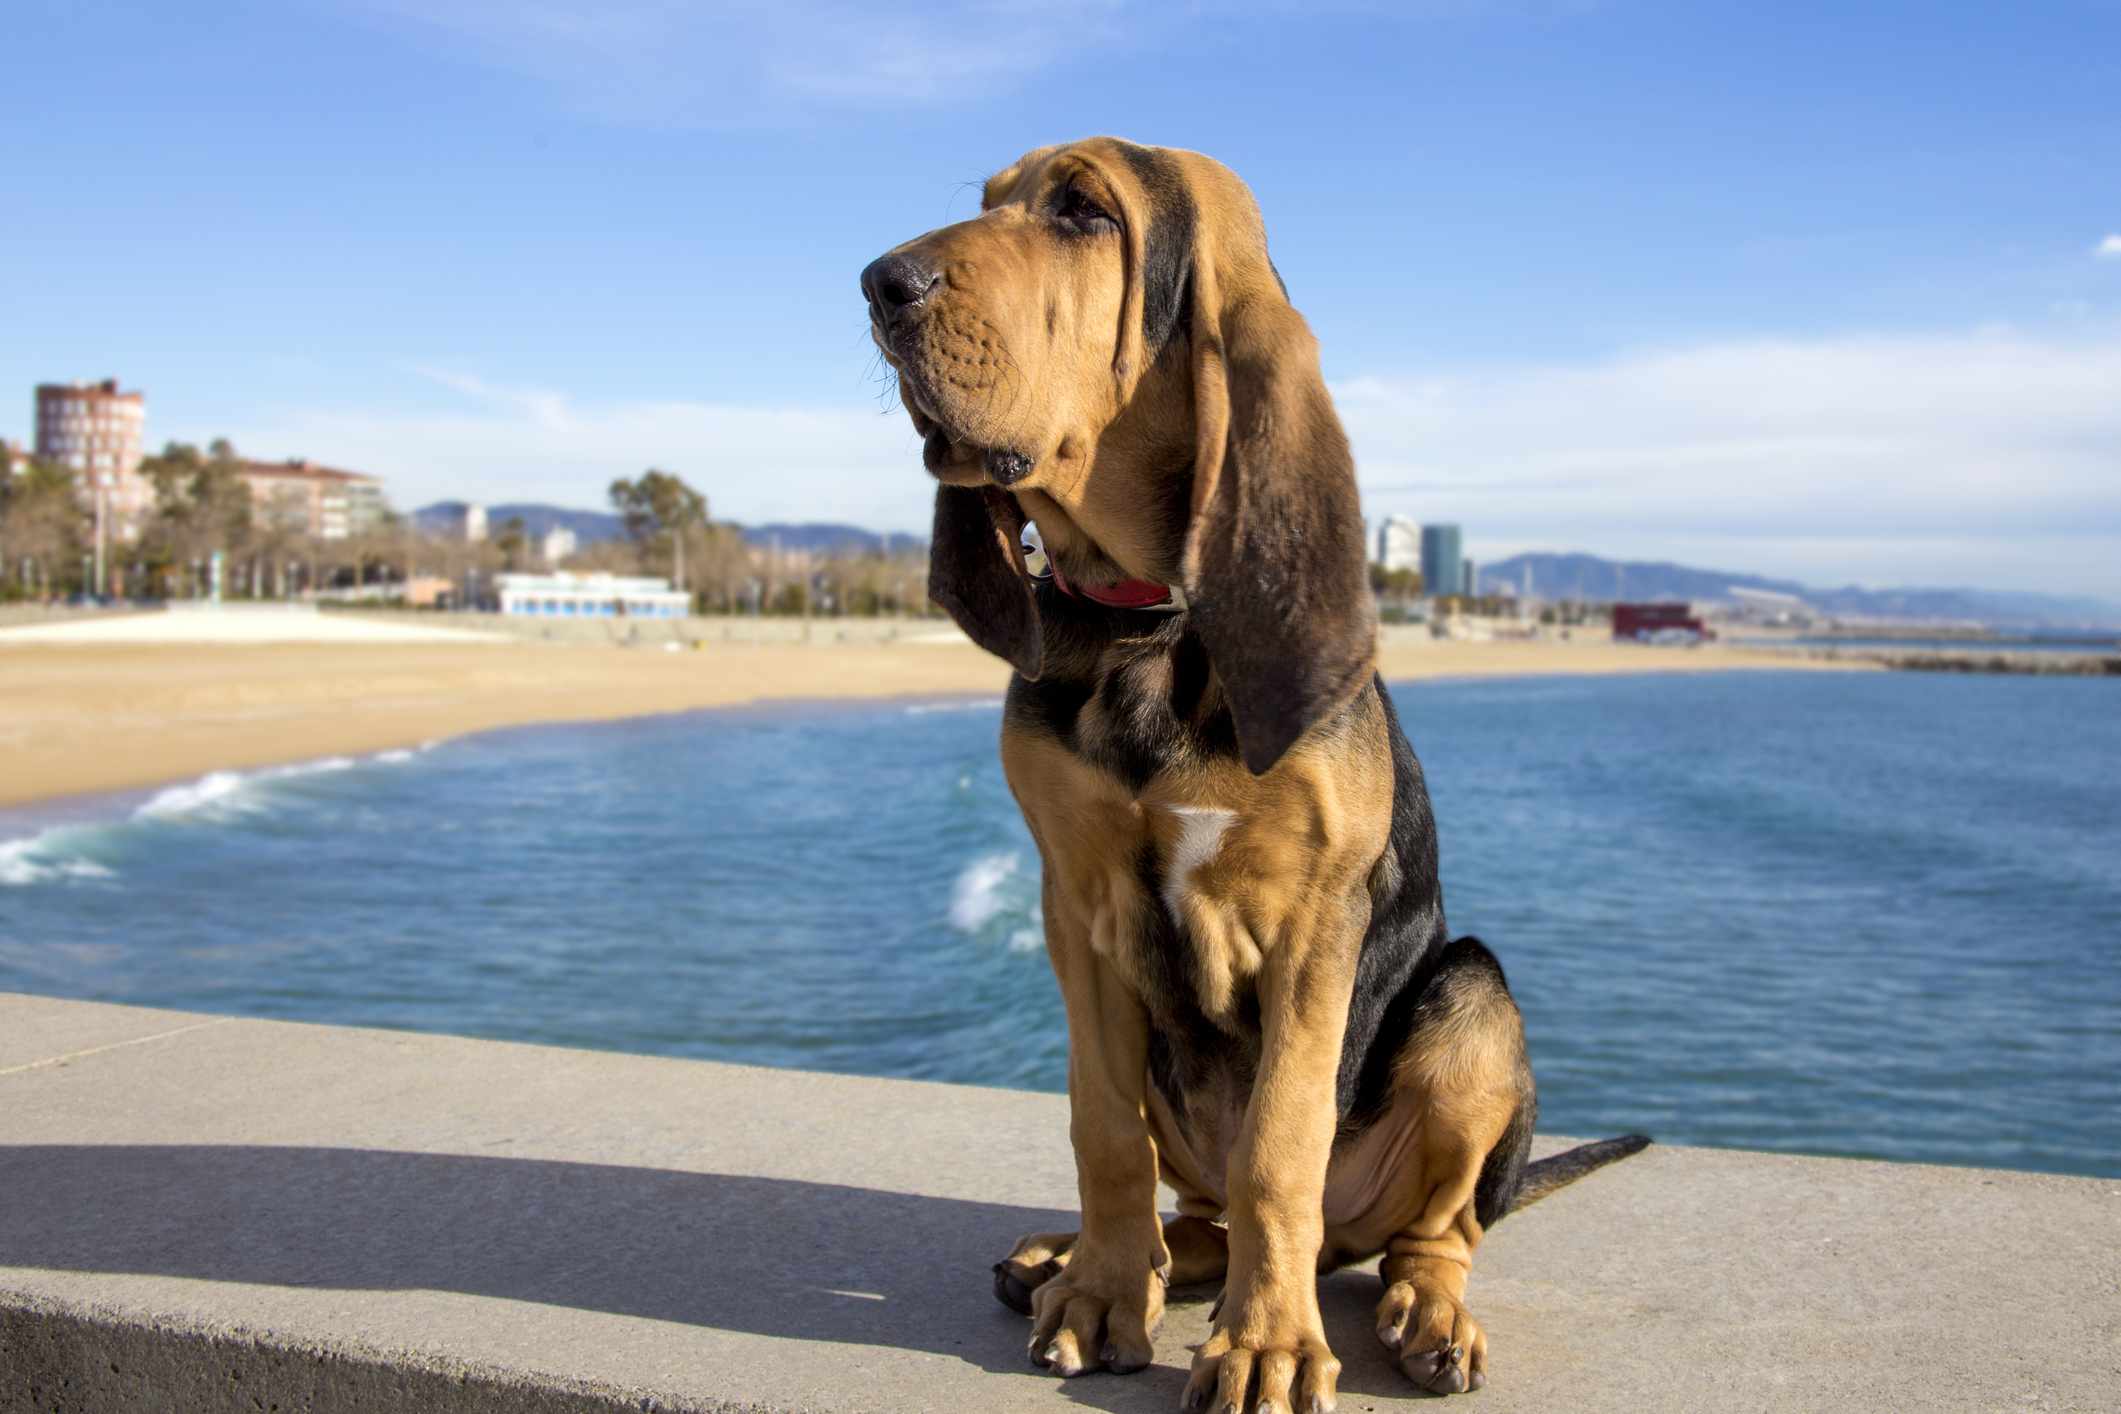 A bloodhound with long, droopy ears and very loose skin sits on a ledge in front of the ocean.